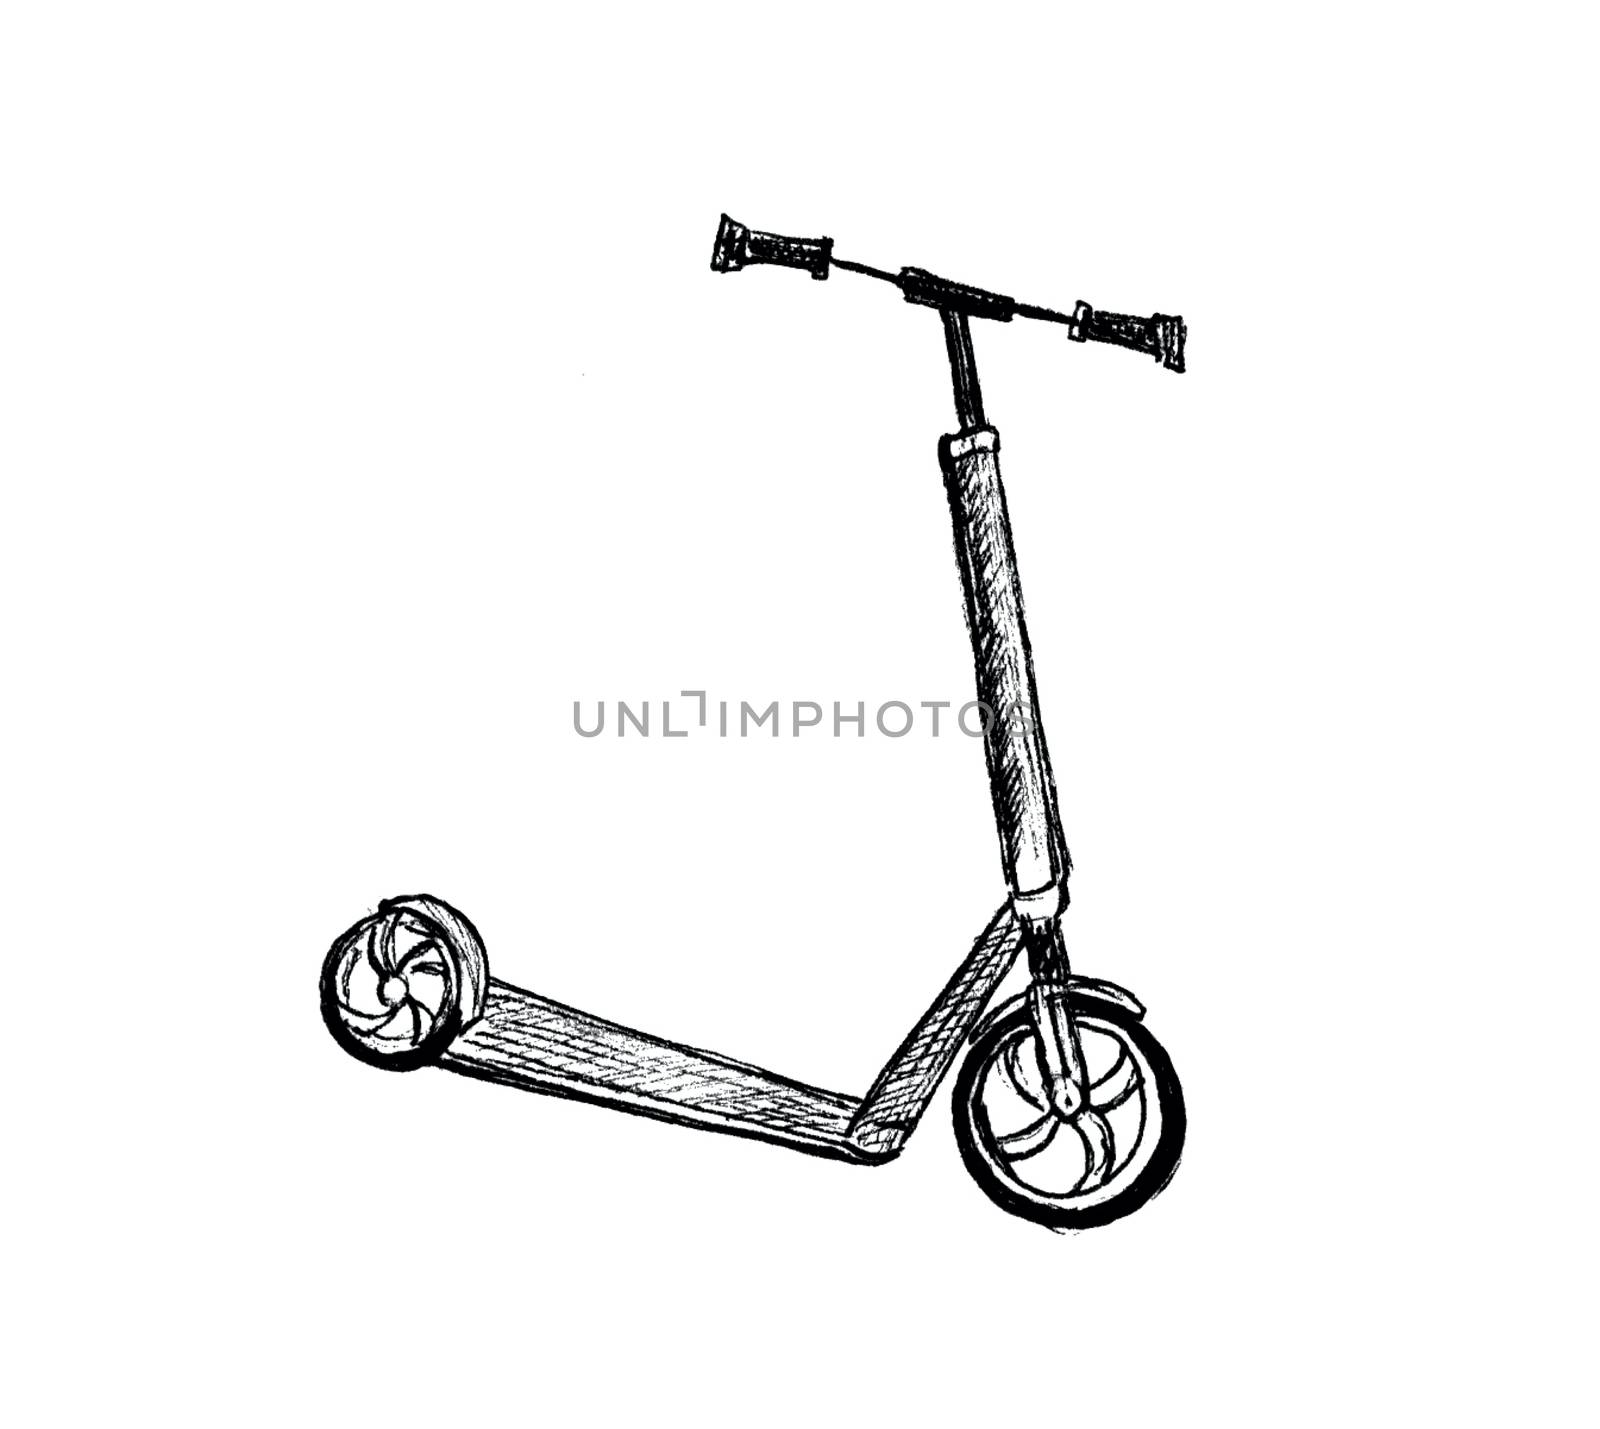 Scooter sketch isolated on white background. Eco alternative transport concept. Han-drawn illustration. 